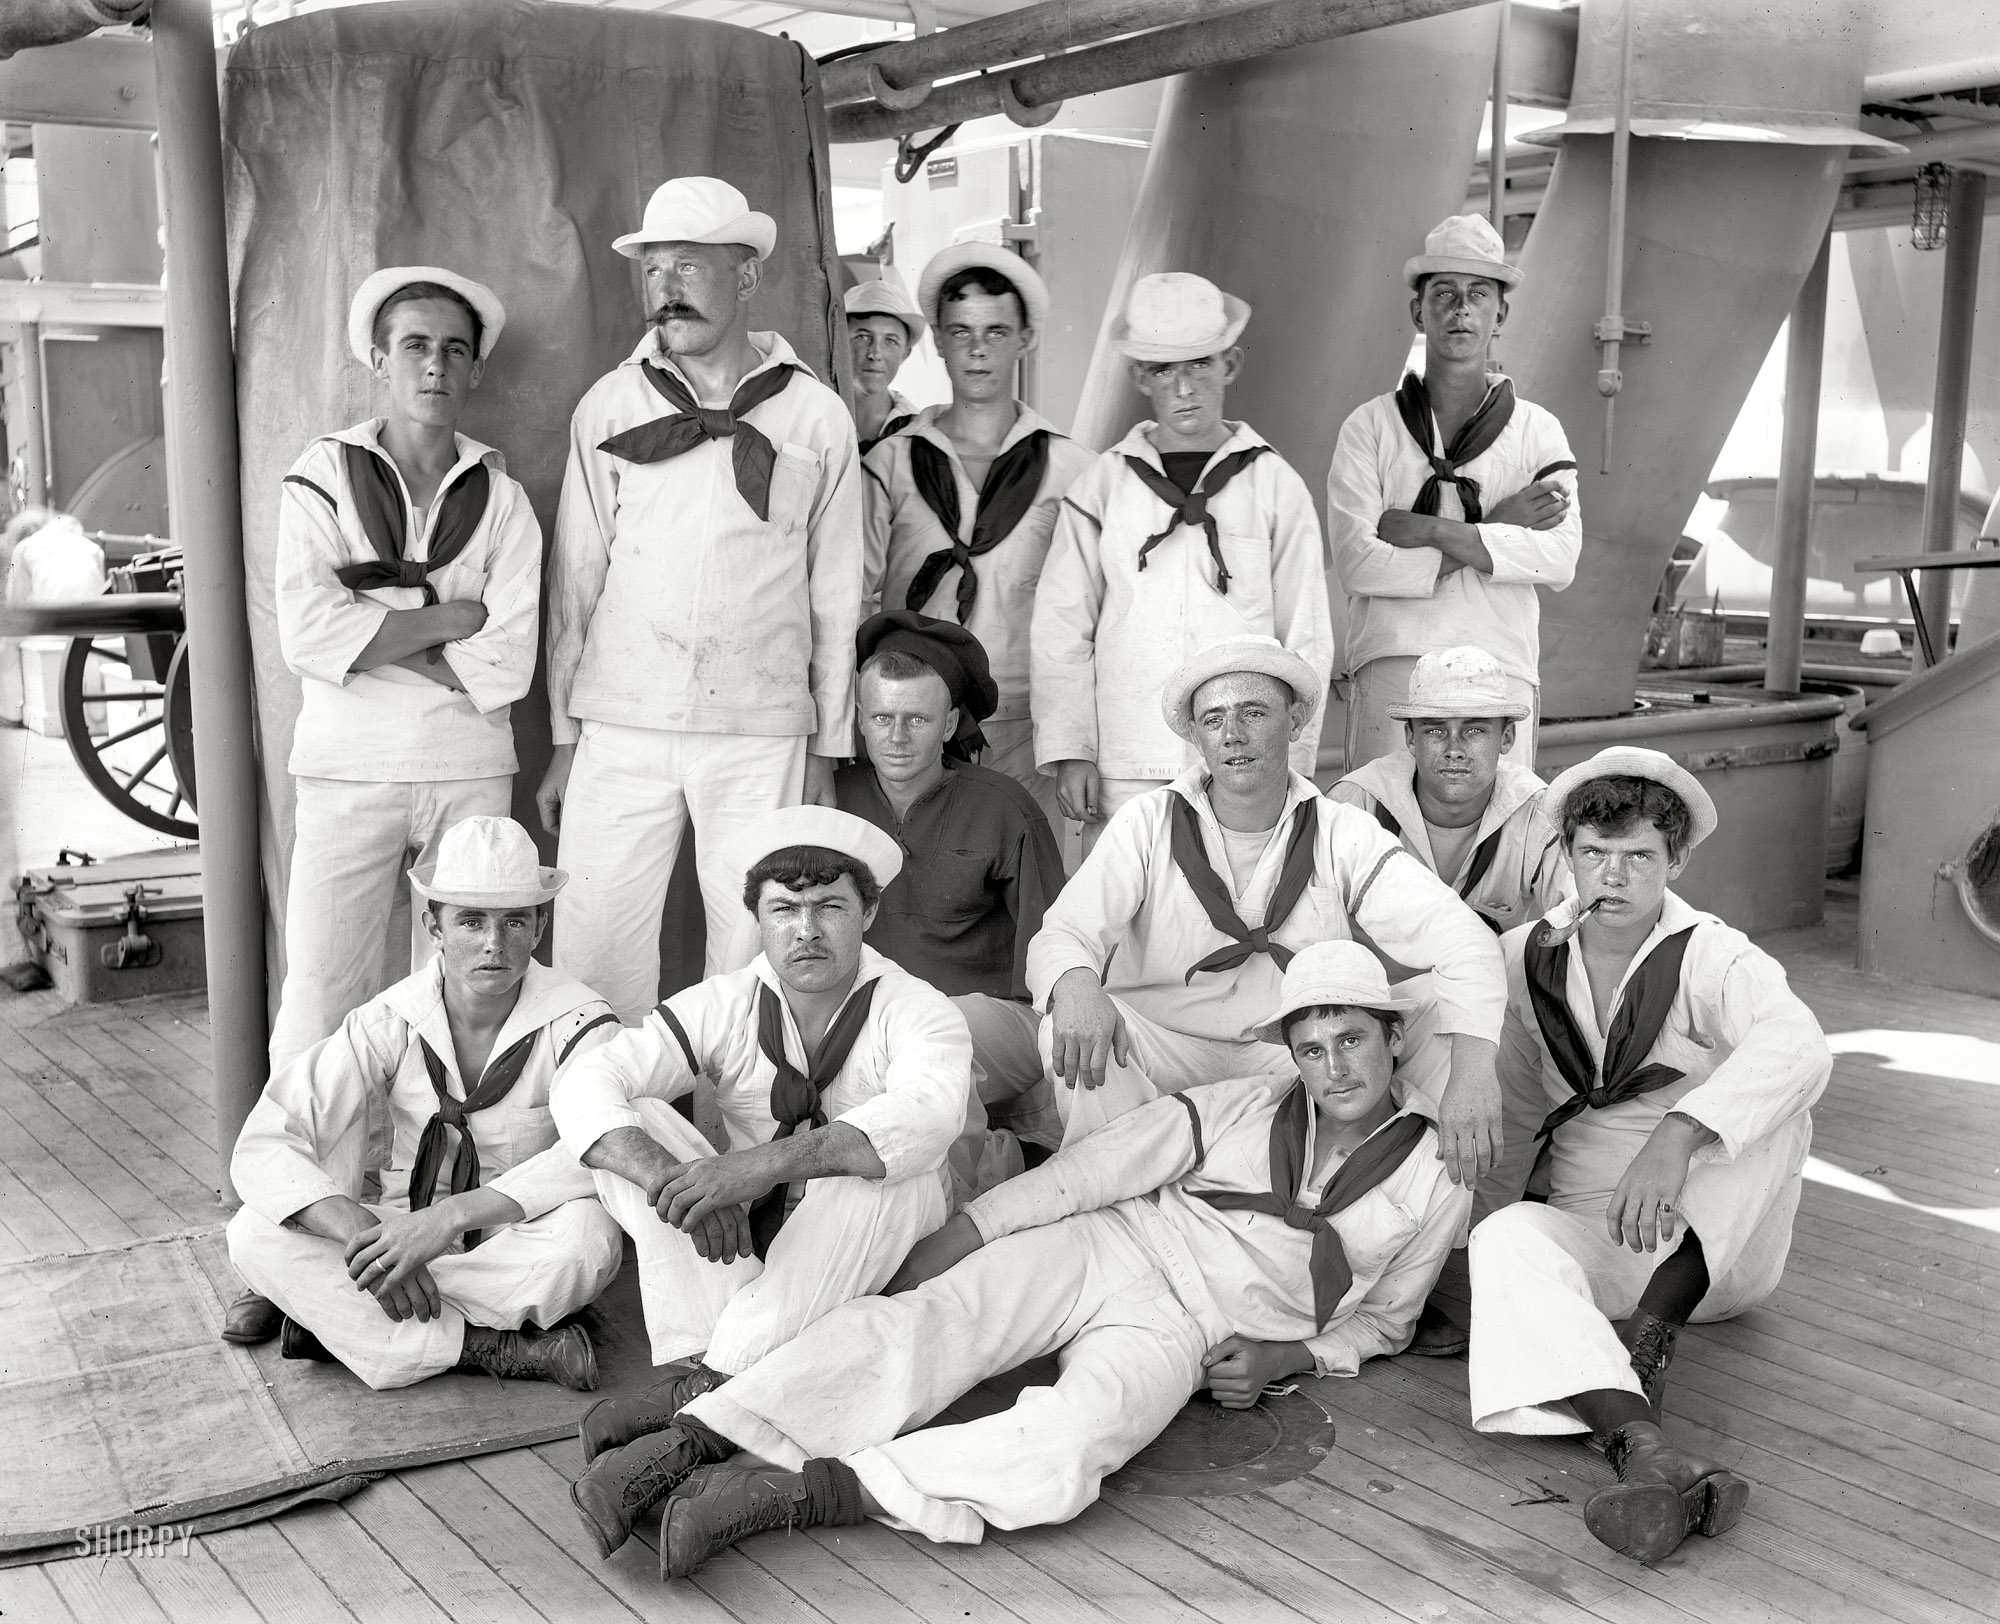 Aboard the U.S.S. New York circa 1896. "Group of sailors." 8x10 inch dry plate glass negative by Edward Hart, Detroit Publishing Company. View full size.